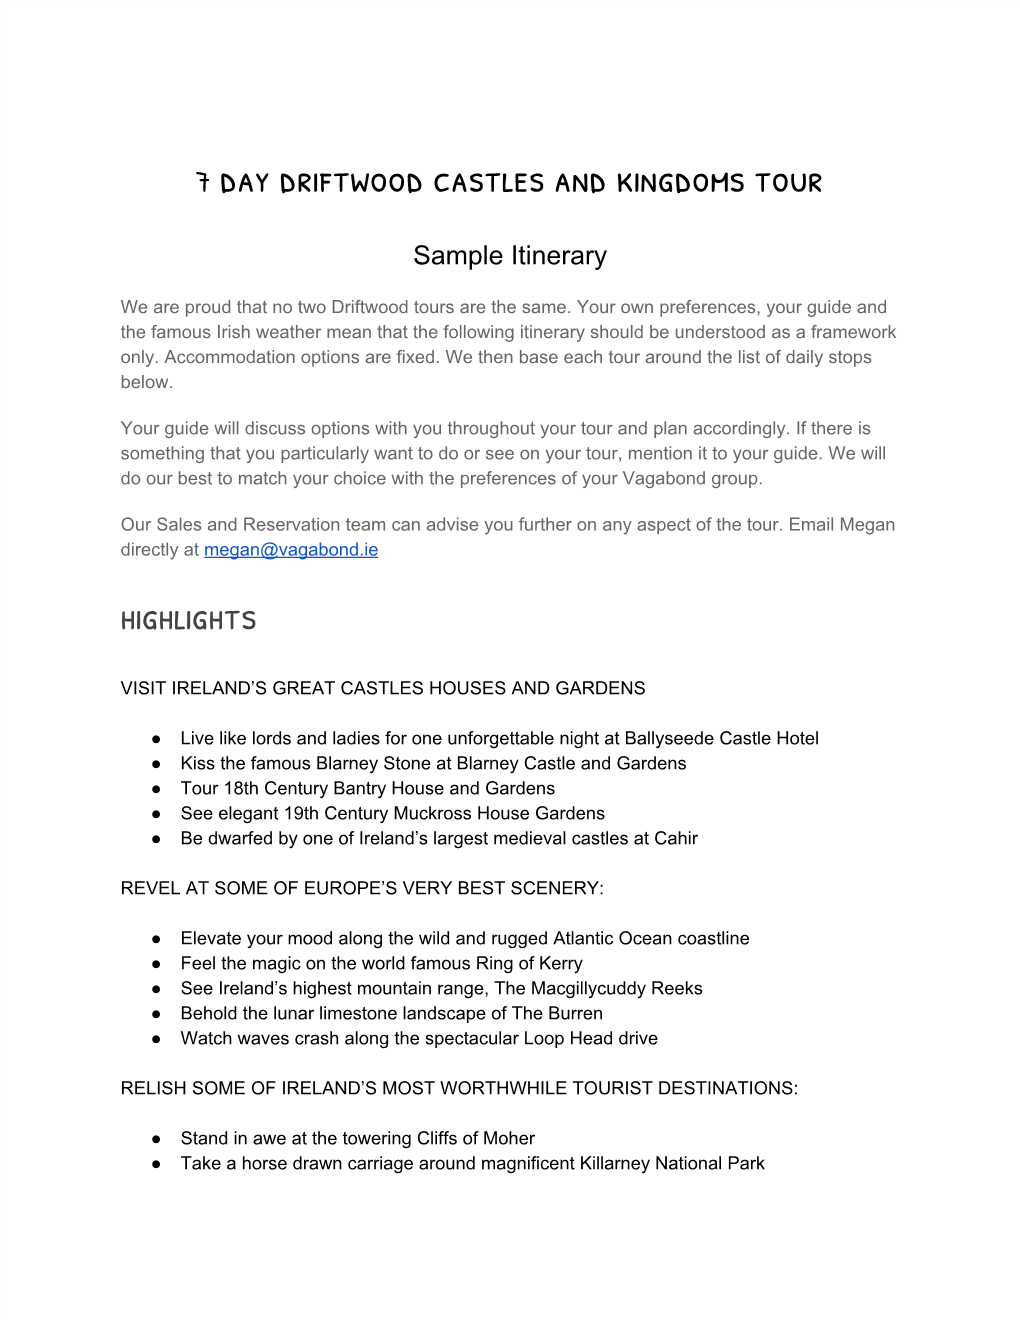 7​ Day Driftwood Castles and Kingdoms Tour Highlights